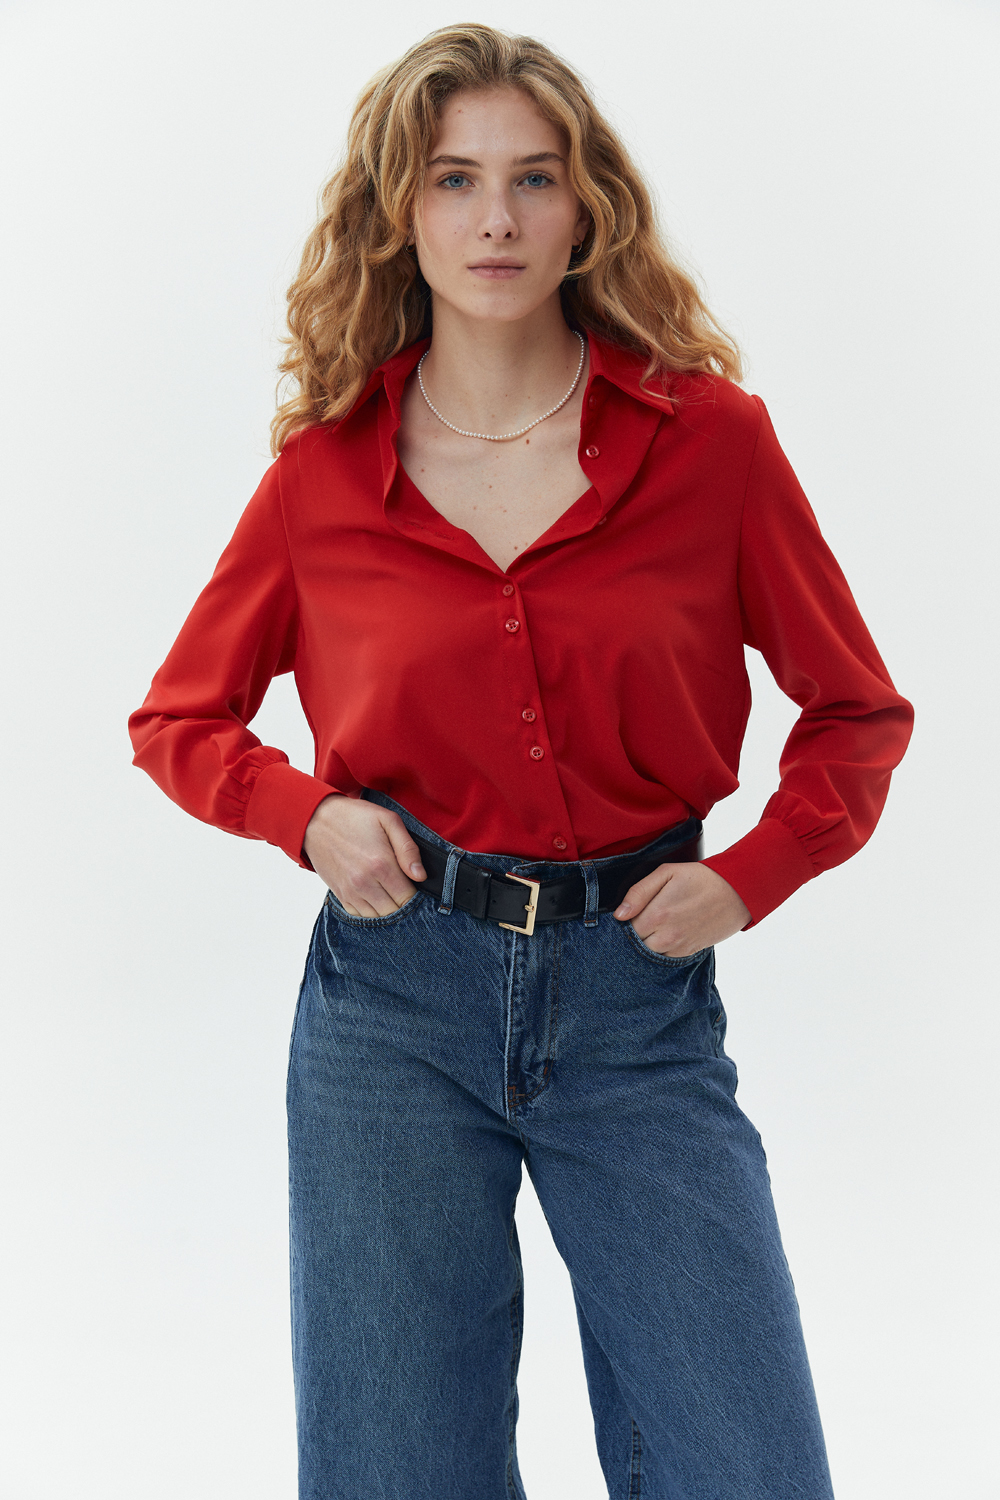 Red button down blouse